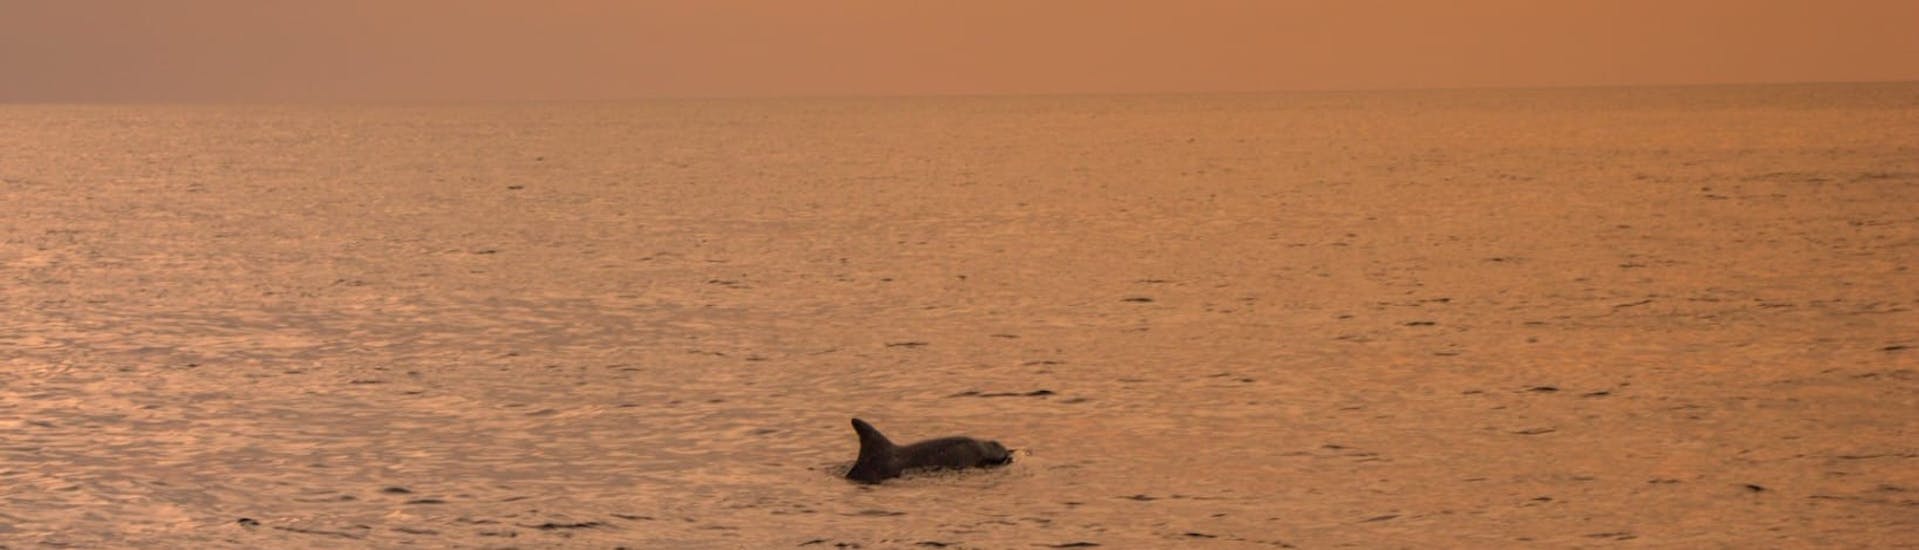 A dolphin in the sea during the Private Sunset Tour with dolphin watching from Fažana.